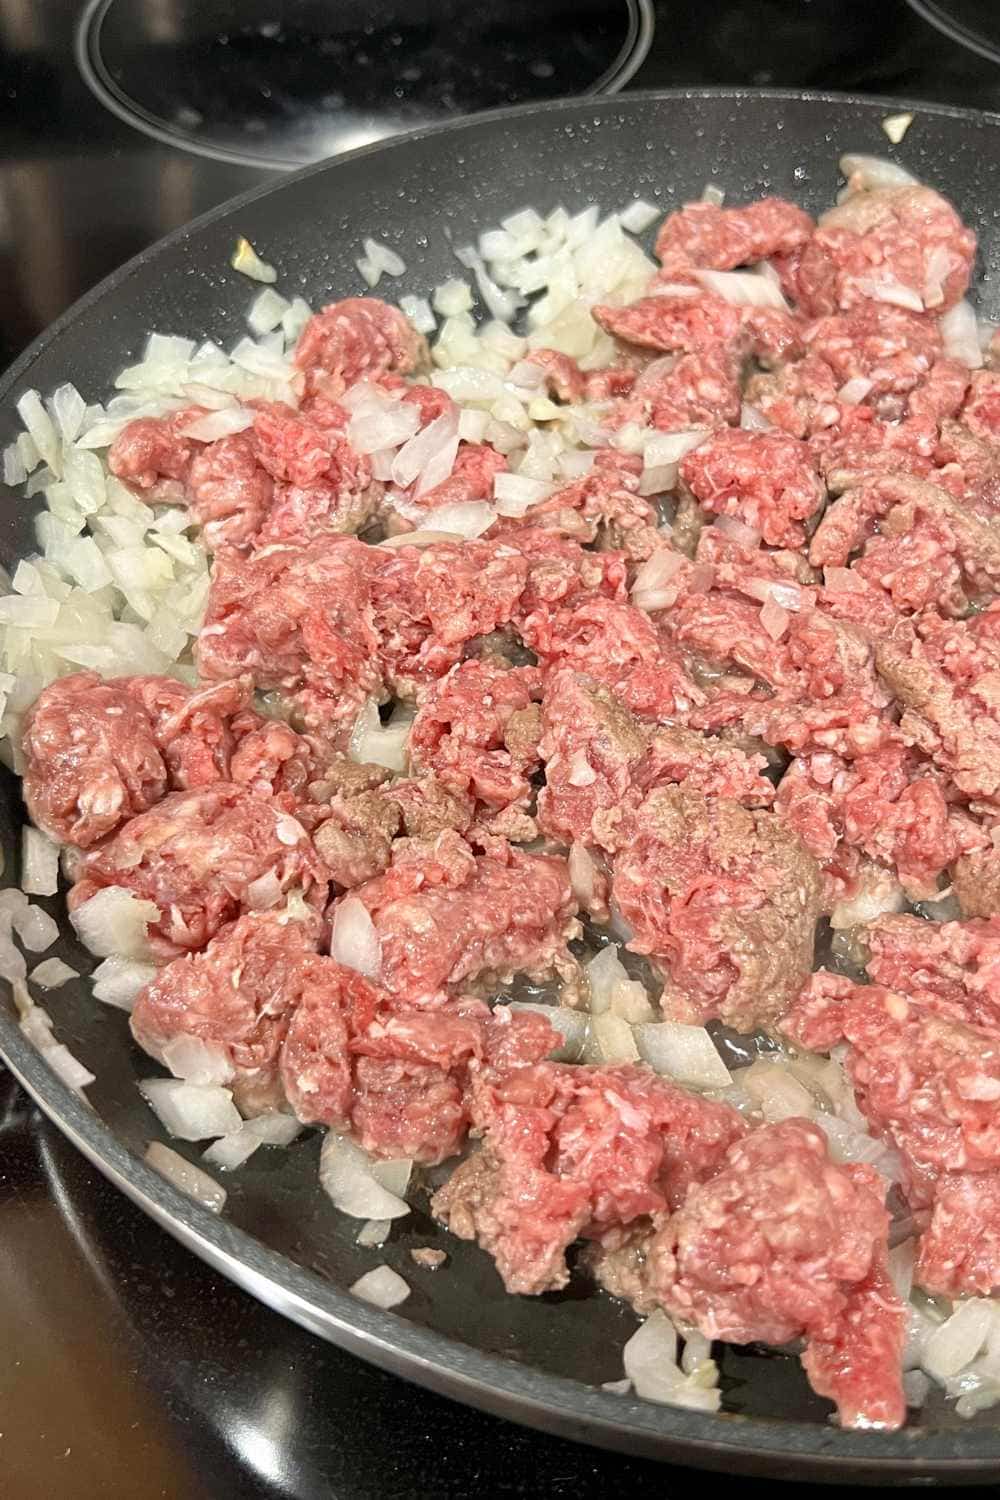 ground beef and onions in skillet starting to brown for tacos